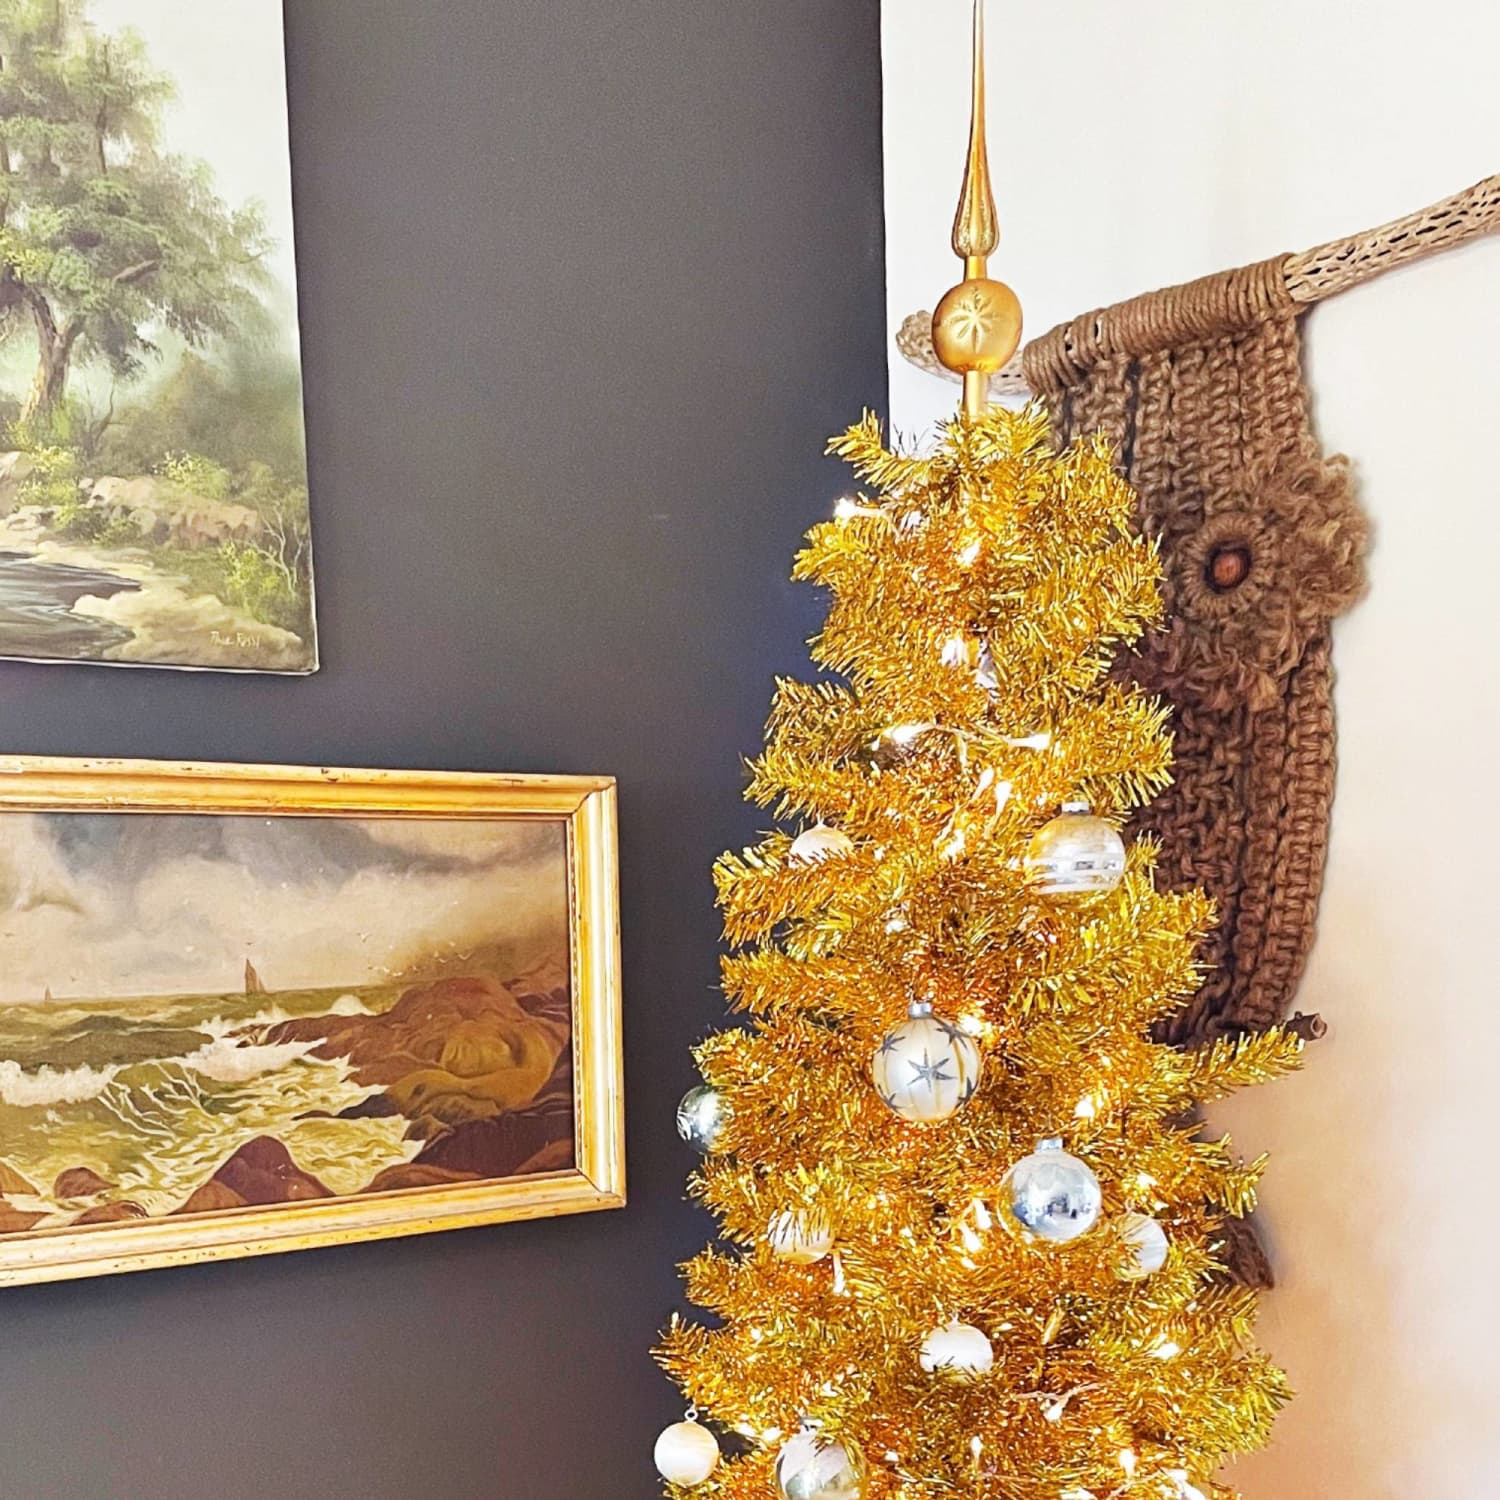 Festive Tinsel Tree with Vintage Ornaments